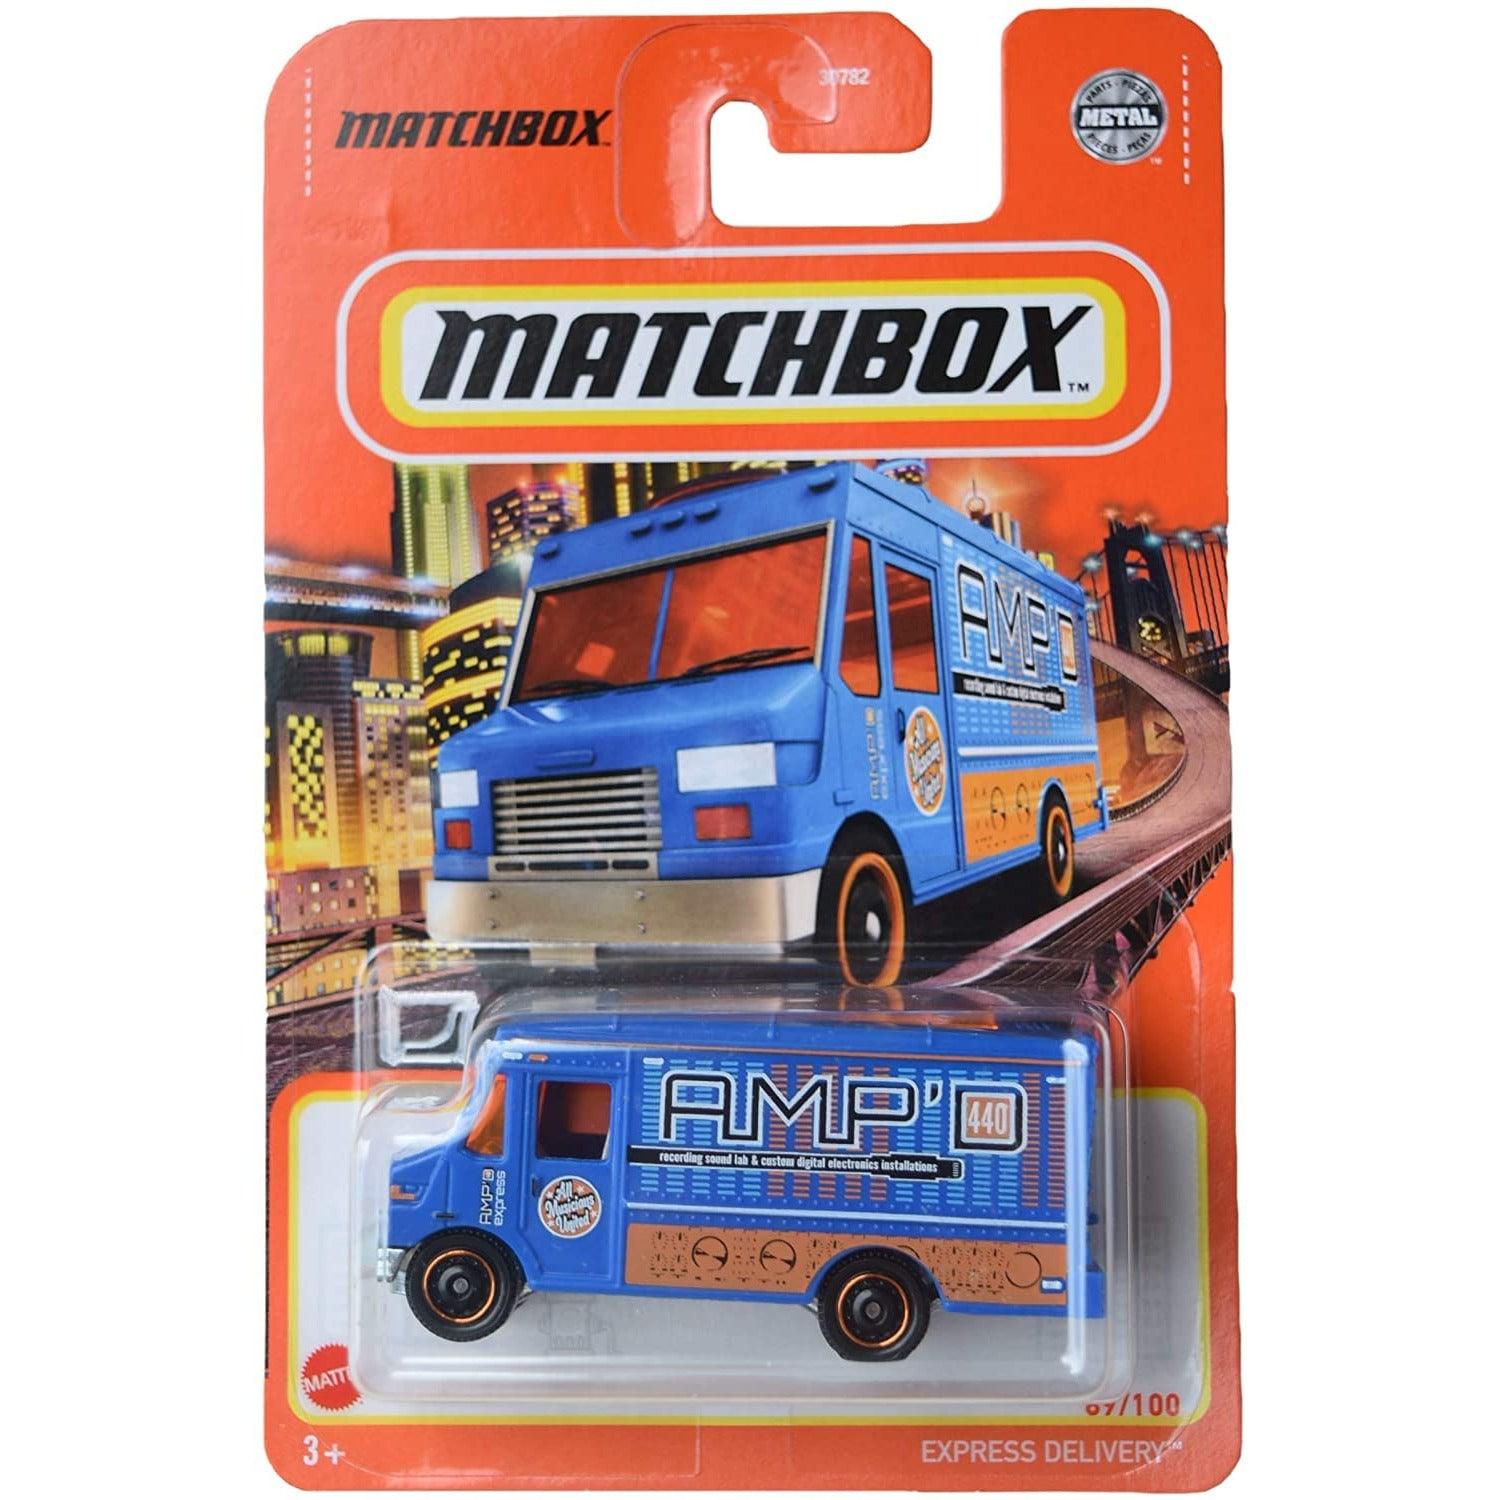 MatchBox Die Cast 1:64 Scale Vehicle - Express Delivery - BumbleToys - 2-4 Years, 5-7 Years, Boys, Collectible Vehicles, MatchBox